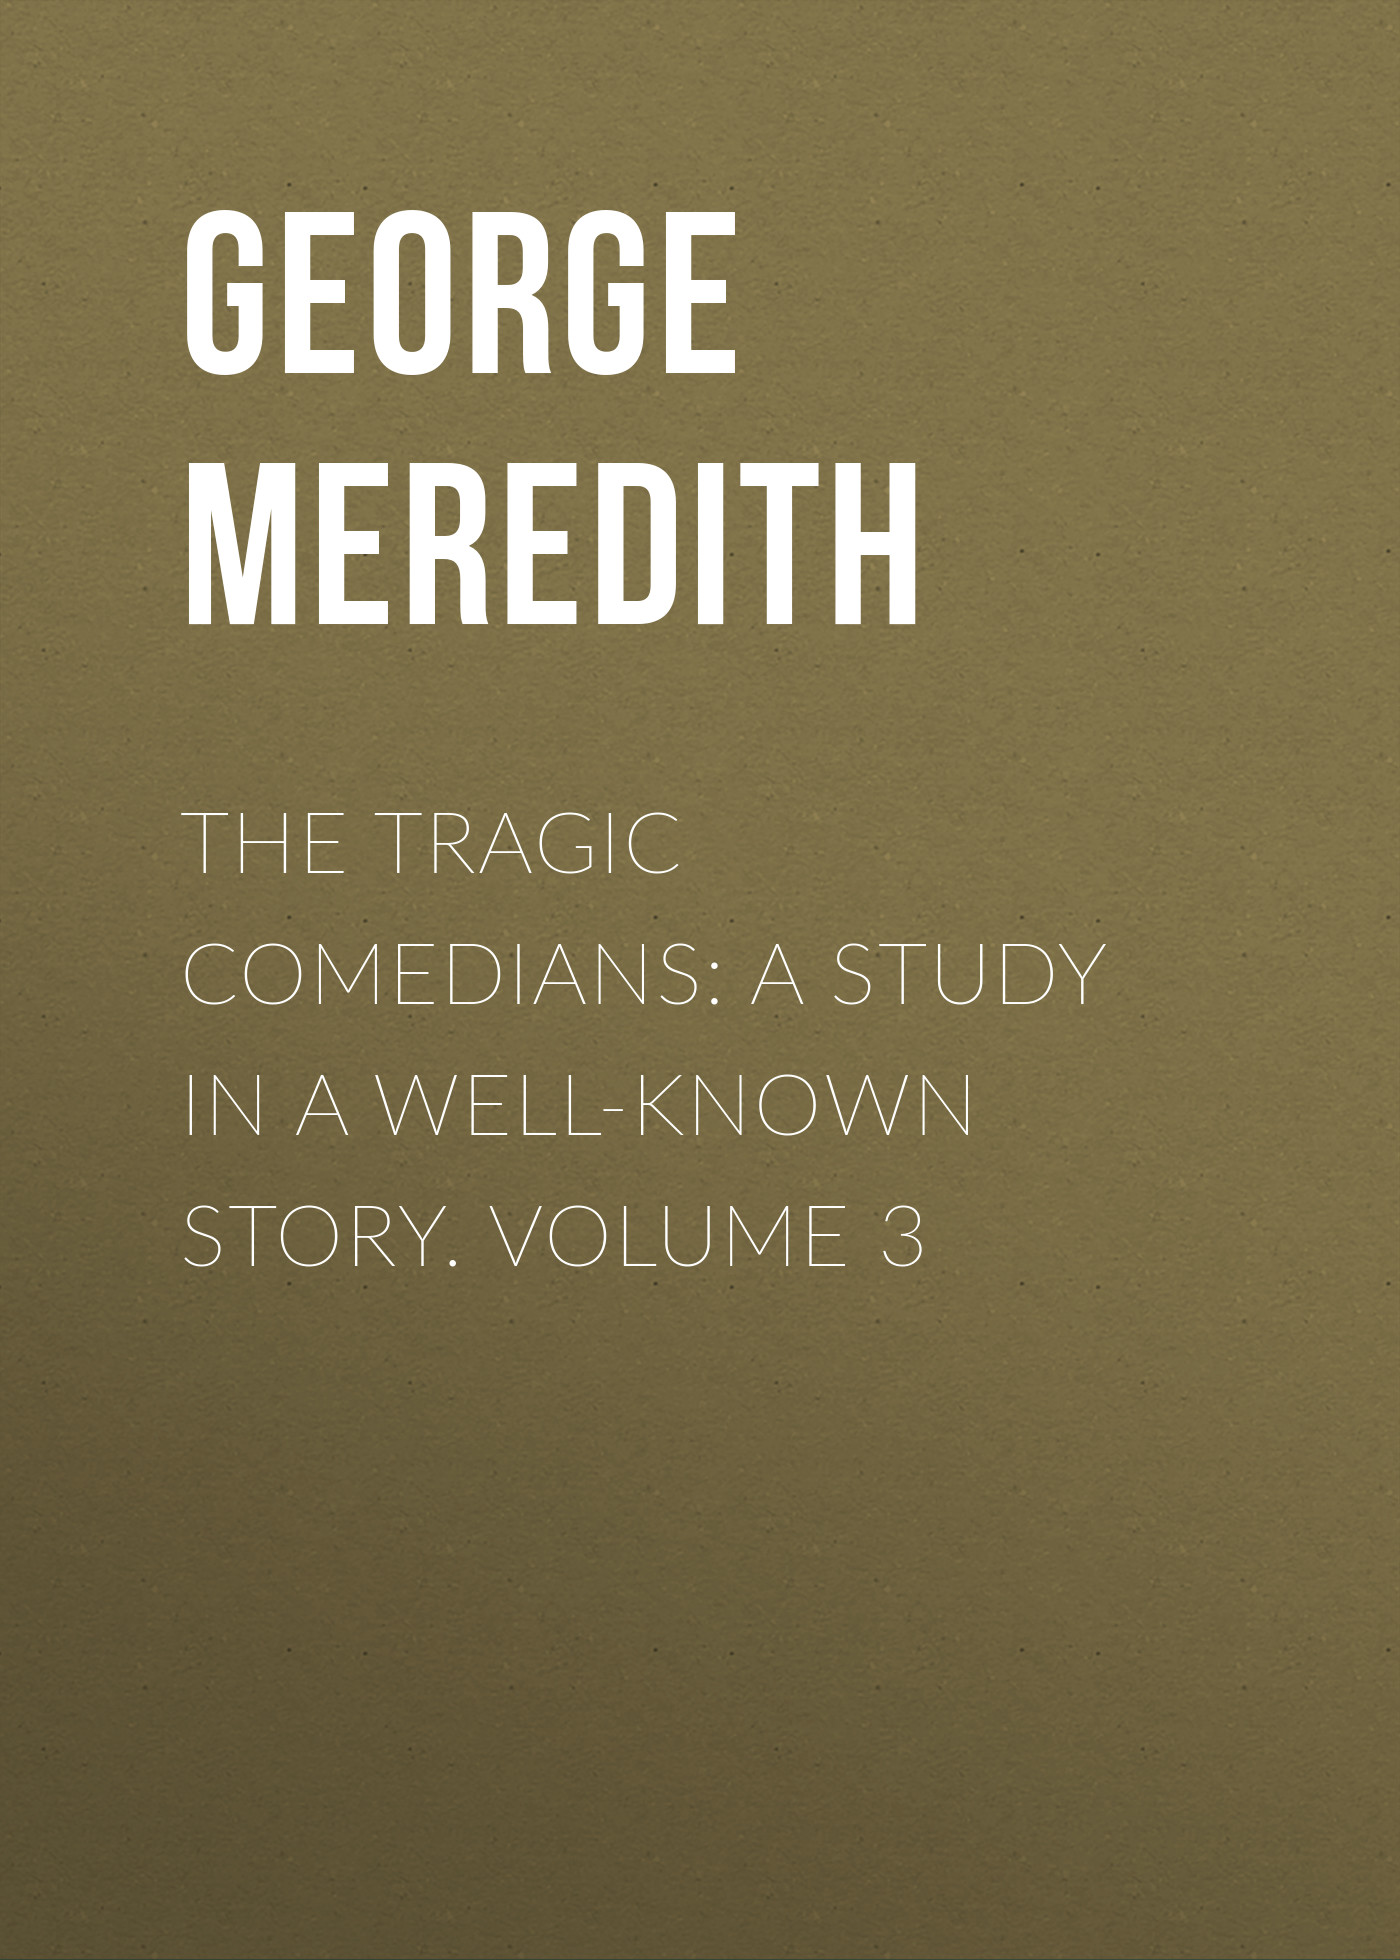 The Tragic Comedians: A Study in a Well-known Story. Volume 3